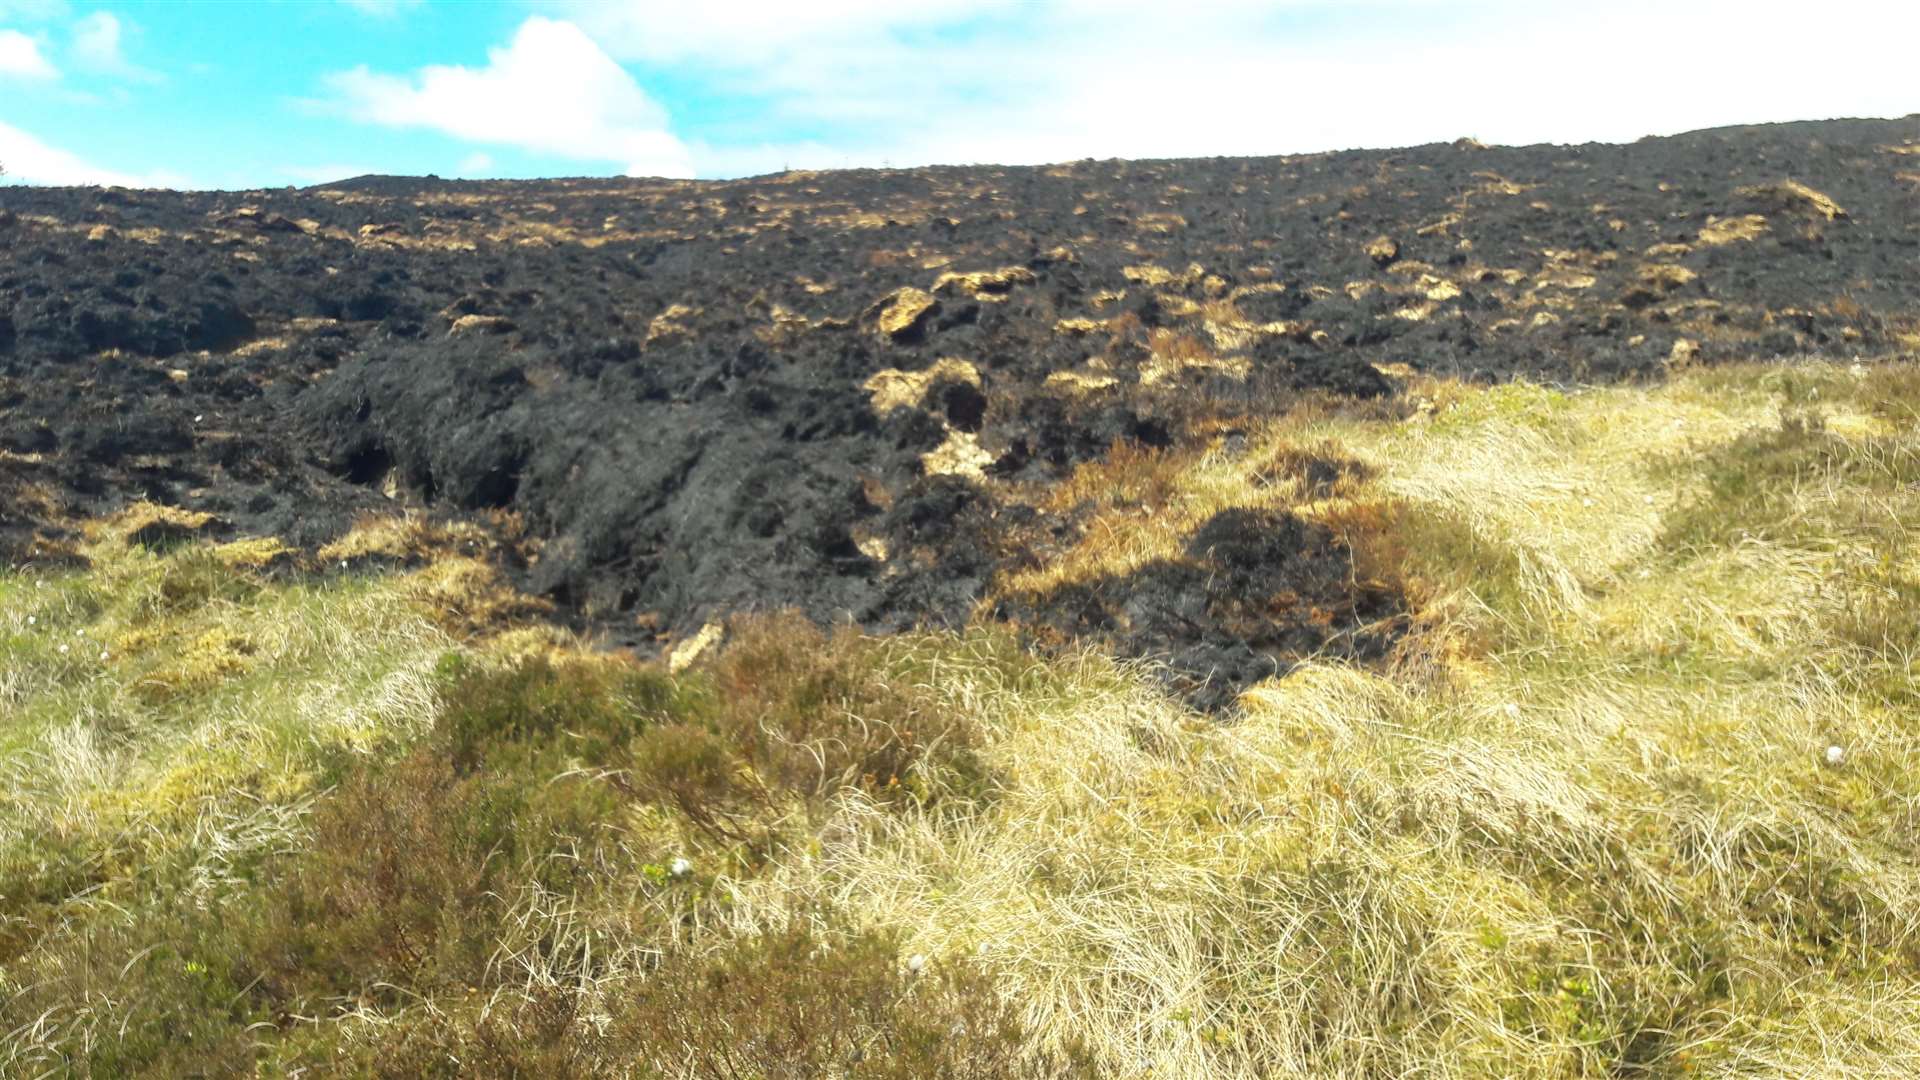 Wildfire damge to peatland is of particular concern.